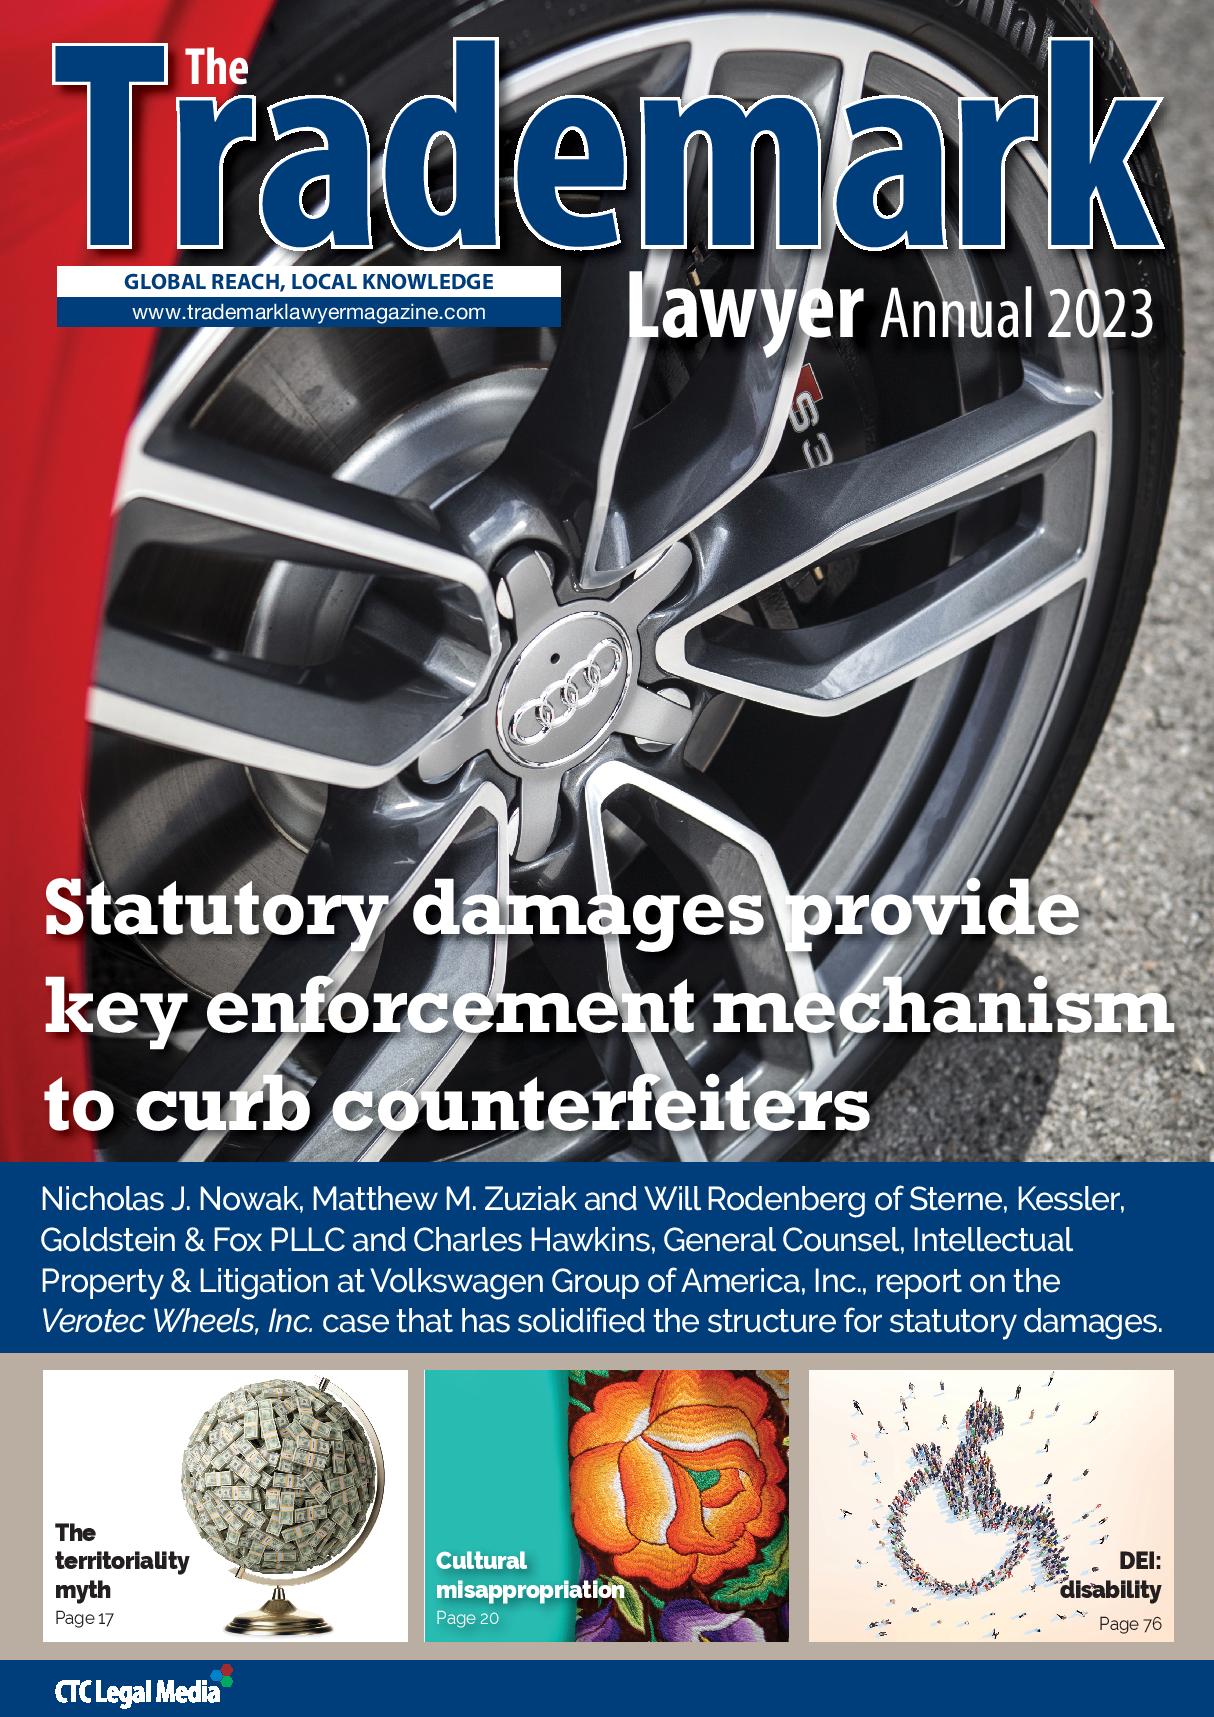 The Trademark Lawyer Issue 5, 2022